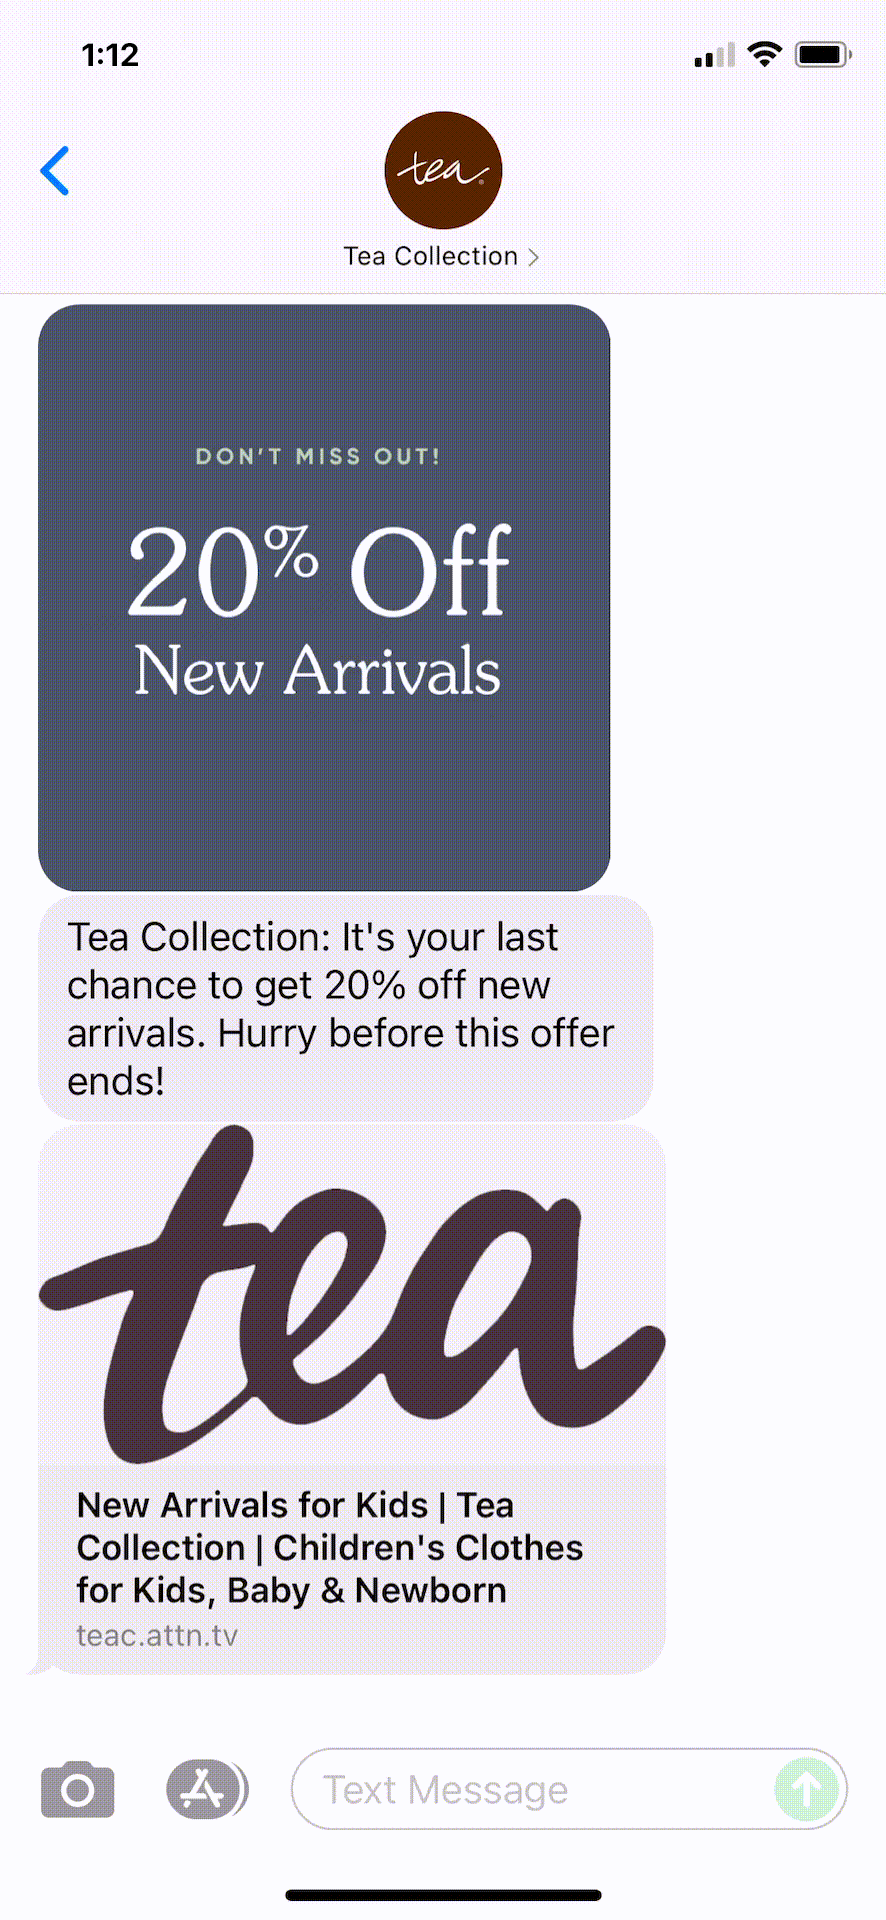 Tea-Collection-Text-Message-Marketing-Example-07.19.2021